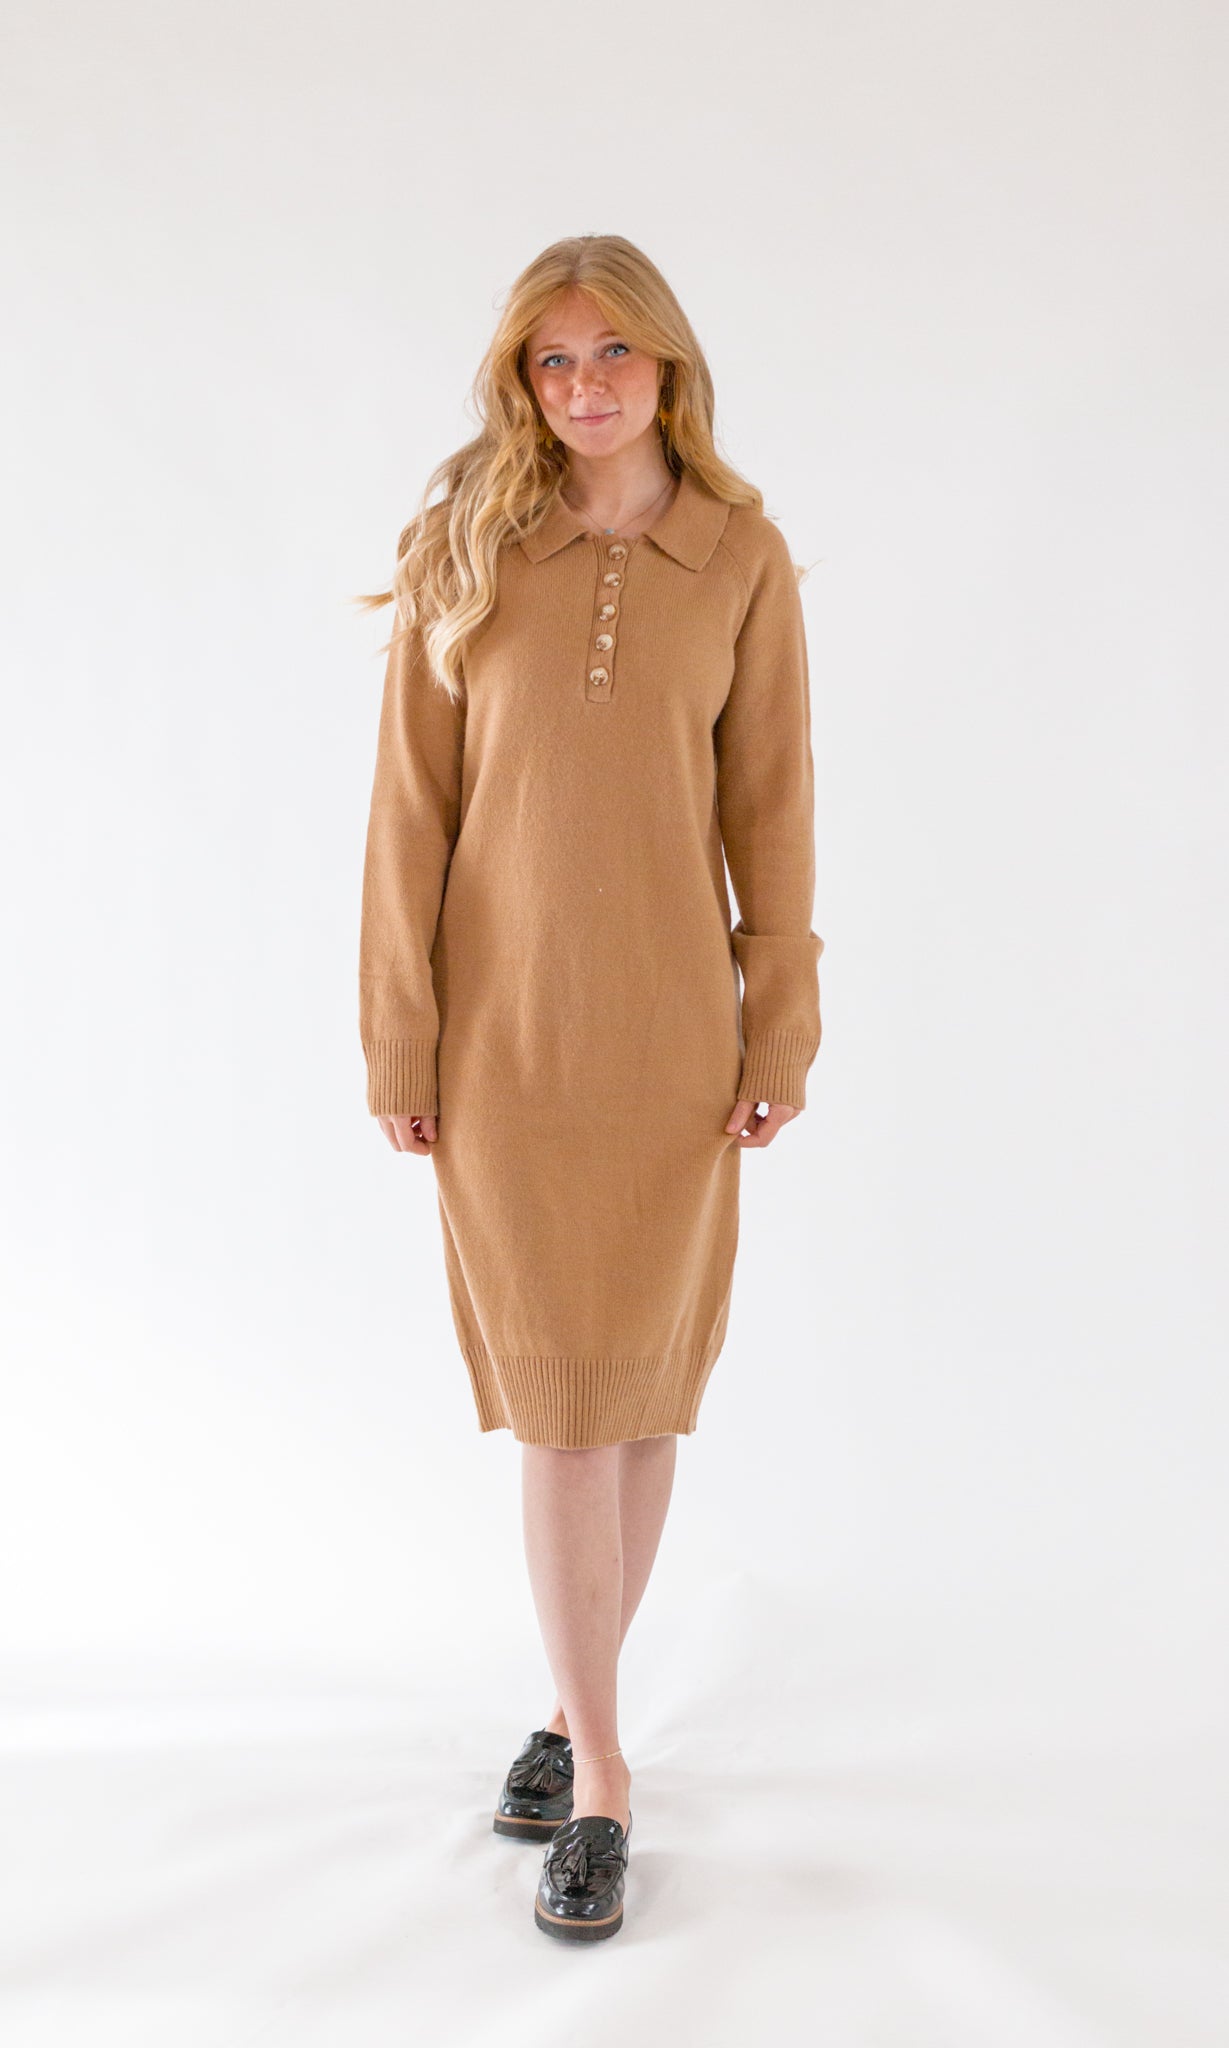 Whesly Sweater Dress